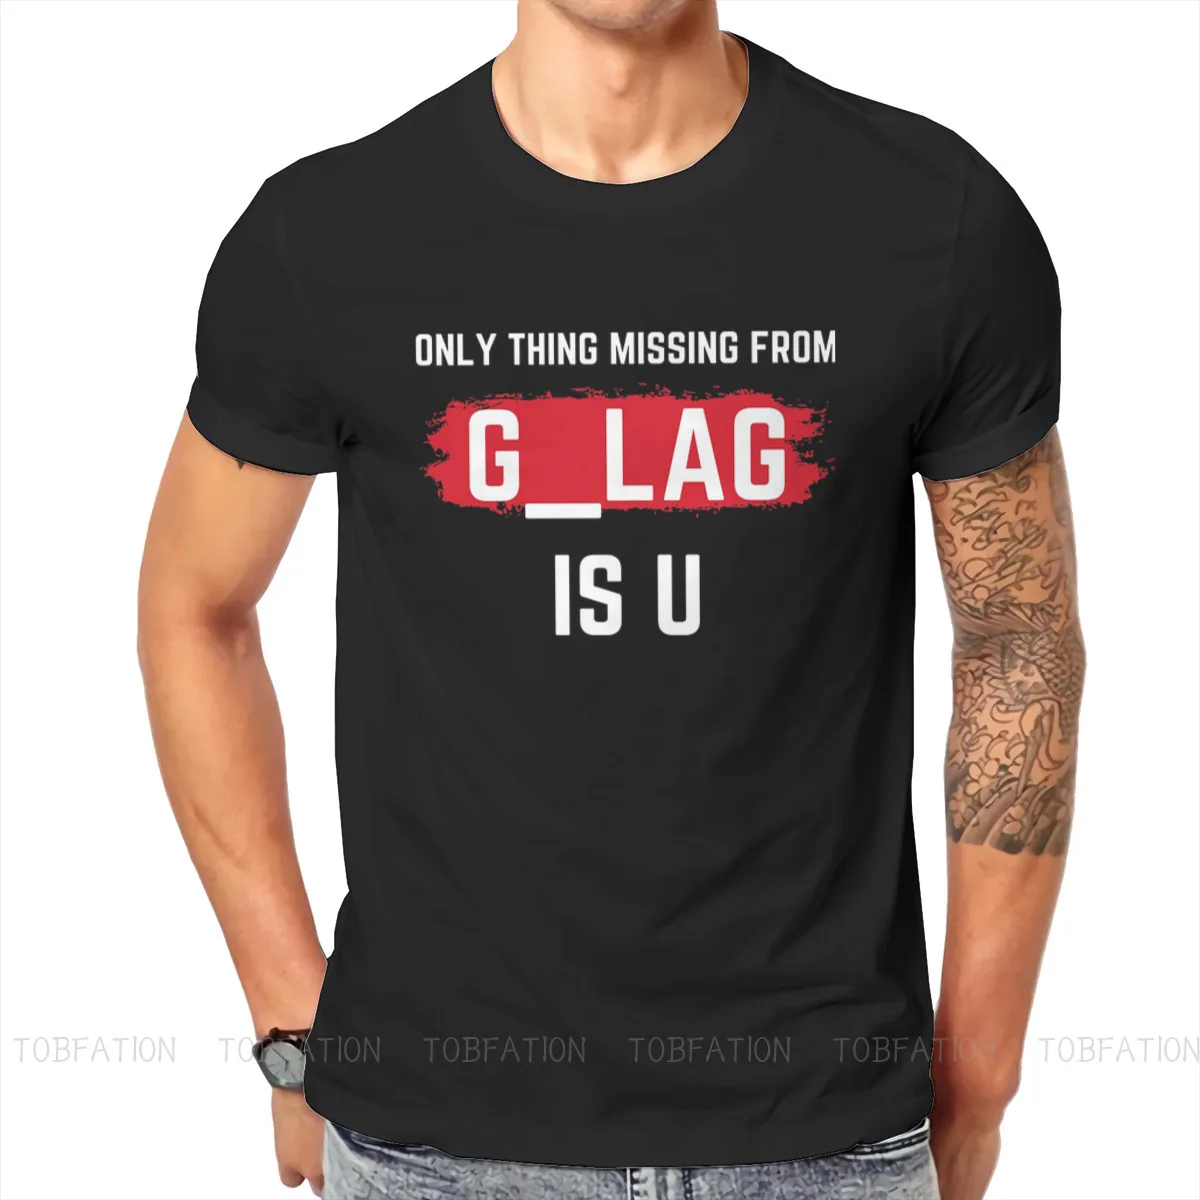 COD Main View Shooting Game TShirt for Men Missing from Gulag  Warzone , Funny Gaming Meme Soft Summer TShirt Novelty New Design